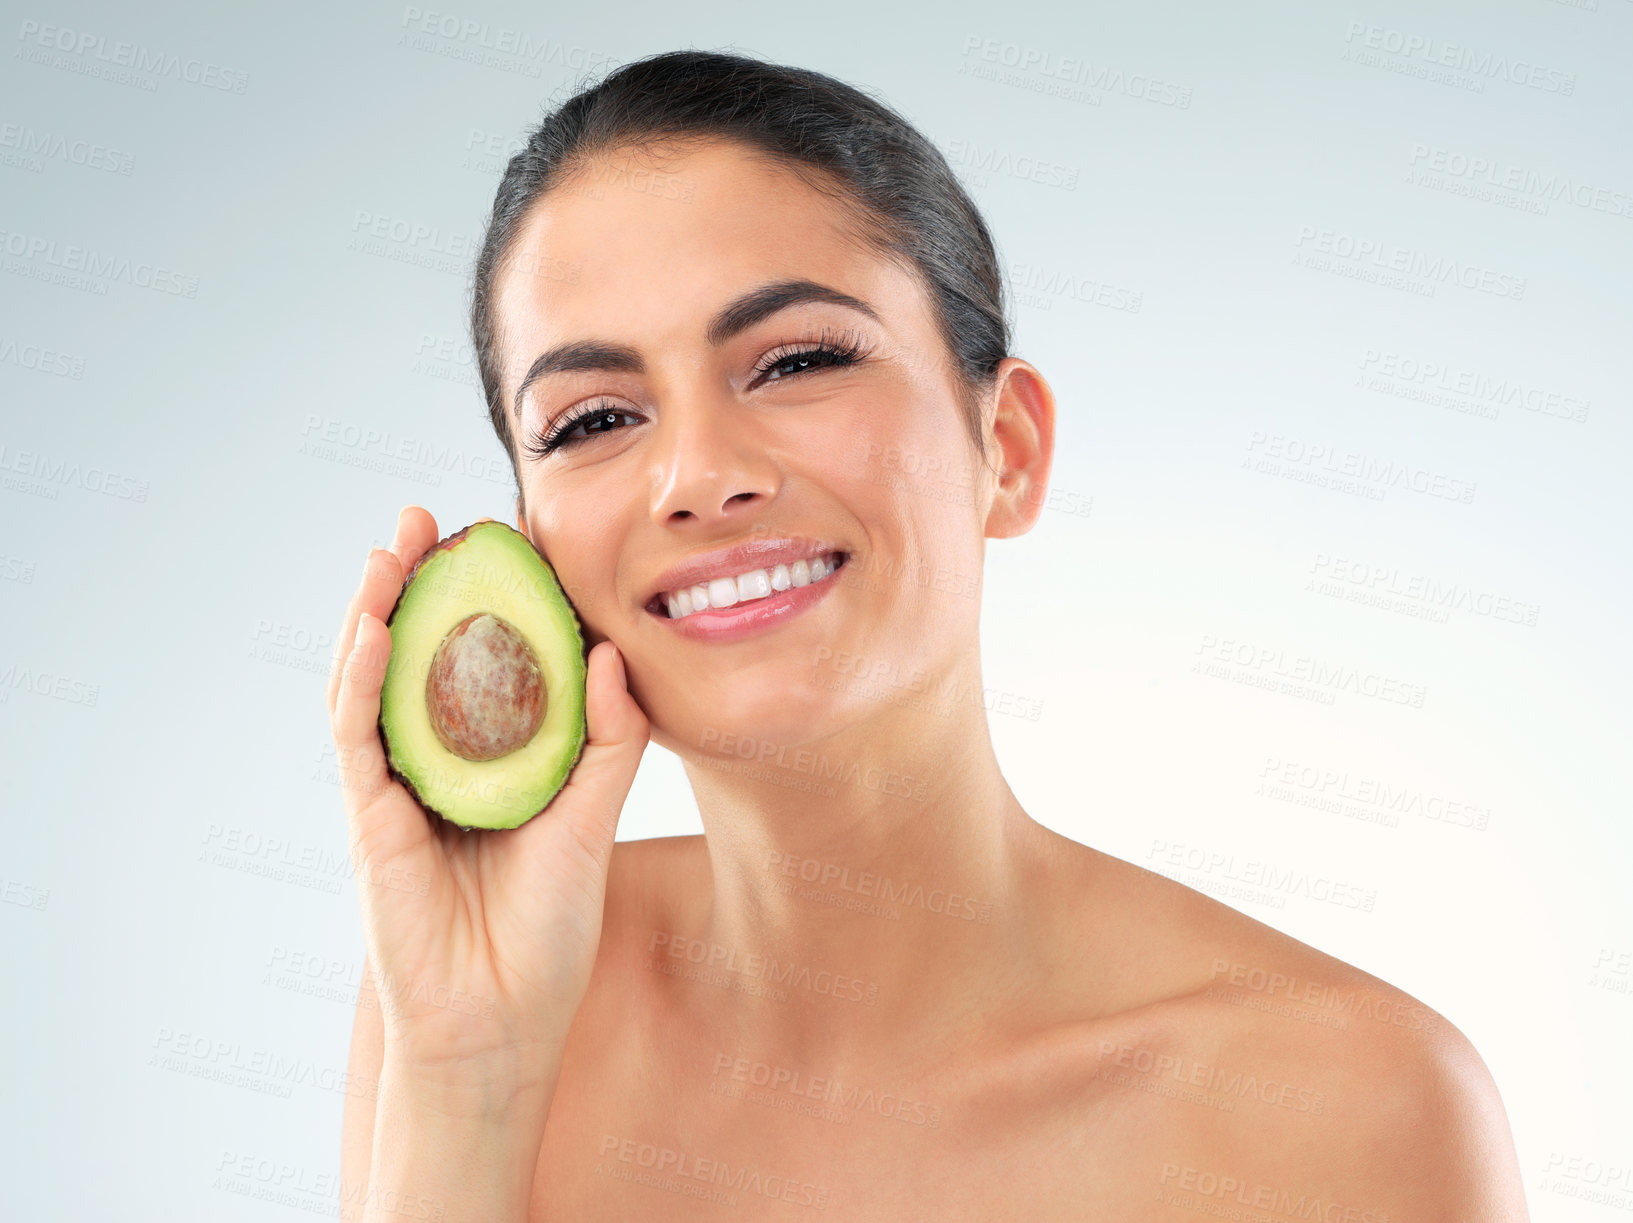 Buy stock photo Studio portrait of a beautiful young woman covering her eye with an avocado against a gray background